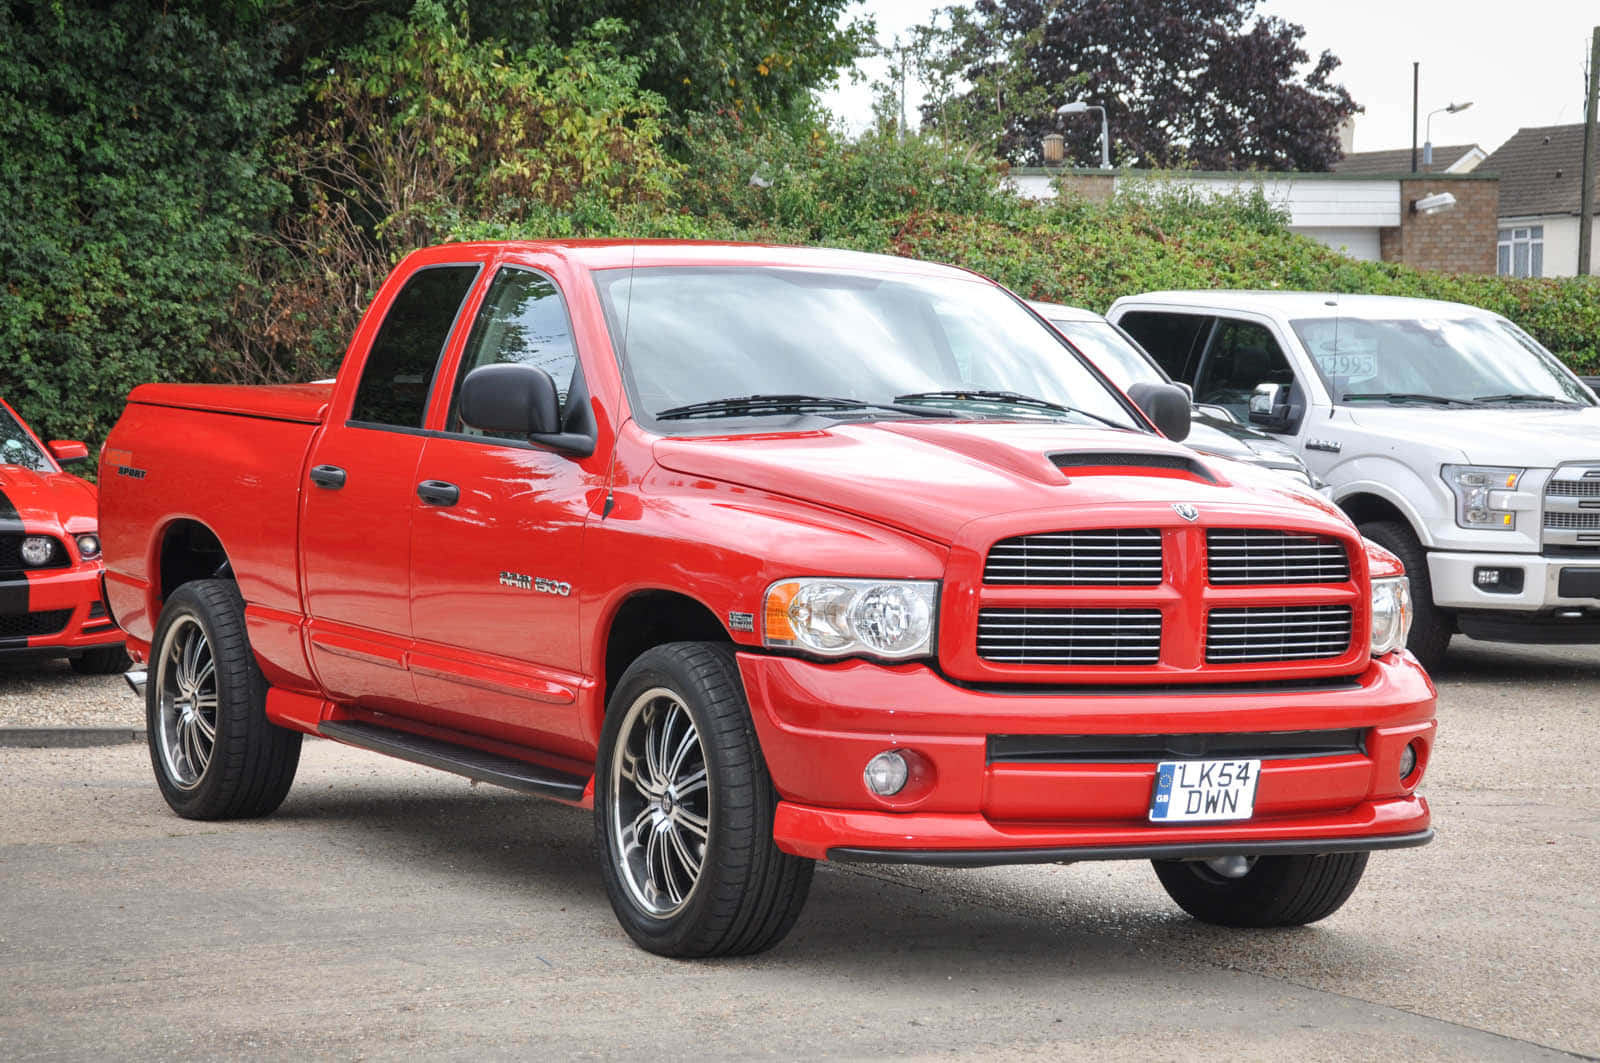 Caption: Agile And Powerful Dodge Ram In Action Wallpaper